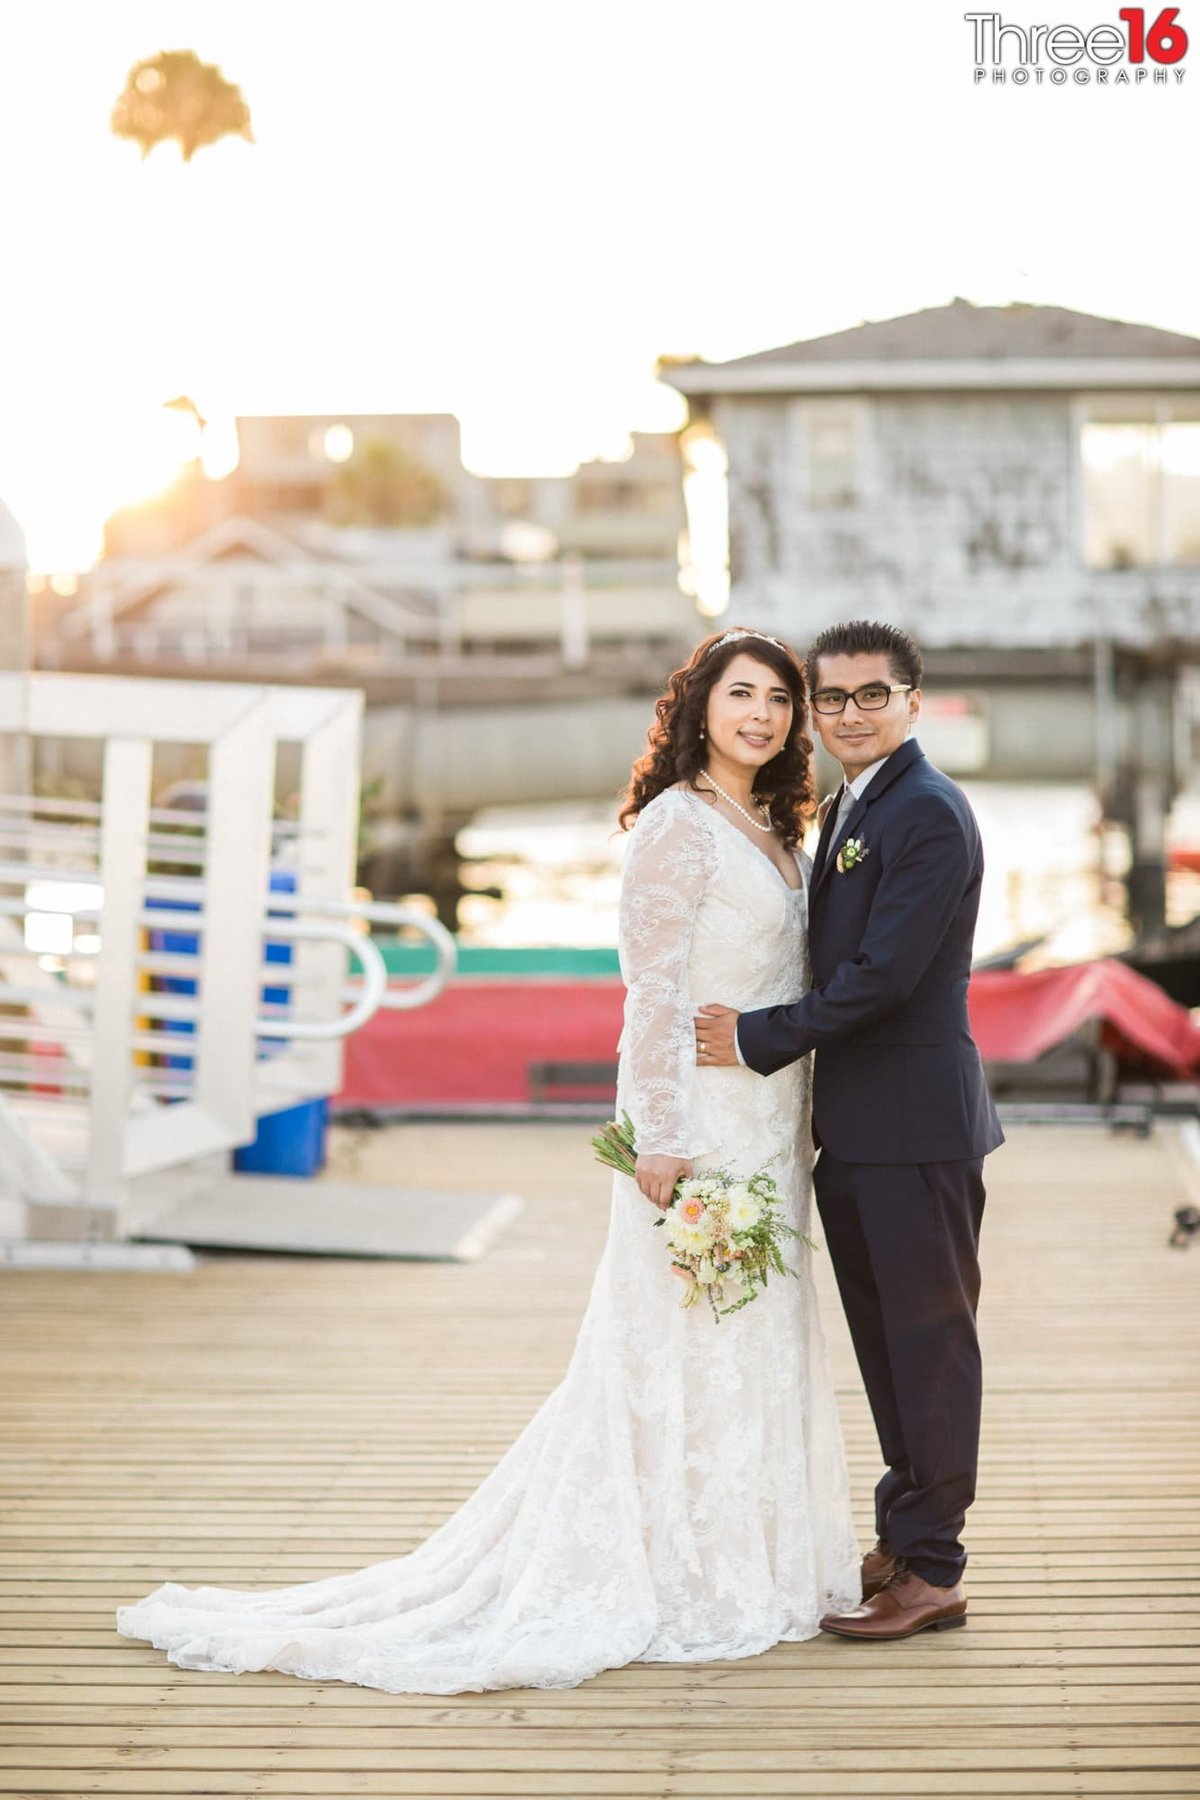 Newly married couple pose for the camera on the harbor dock